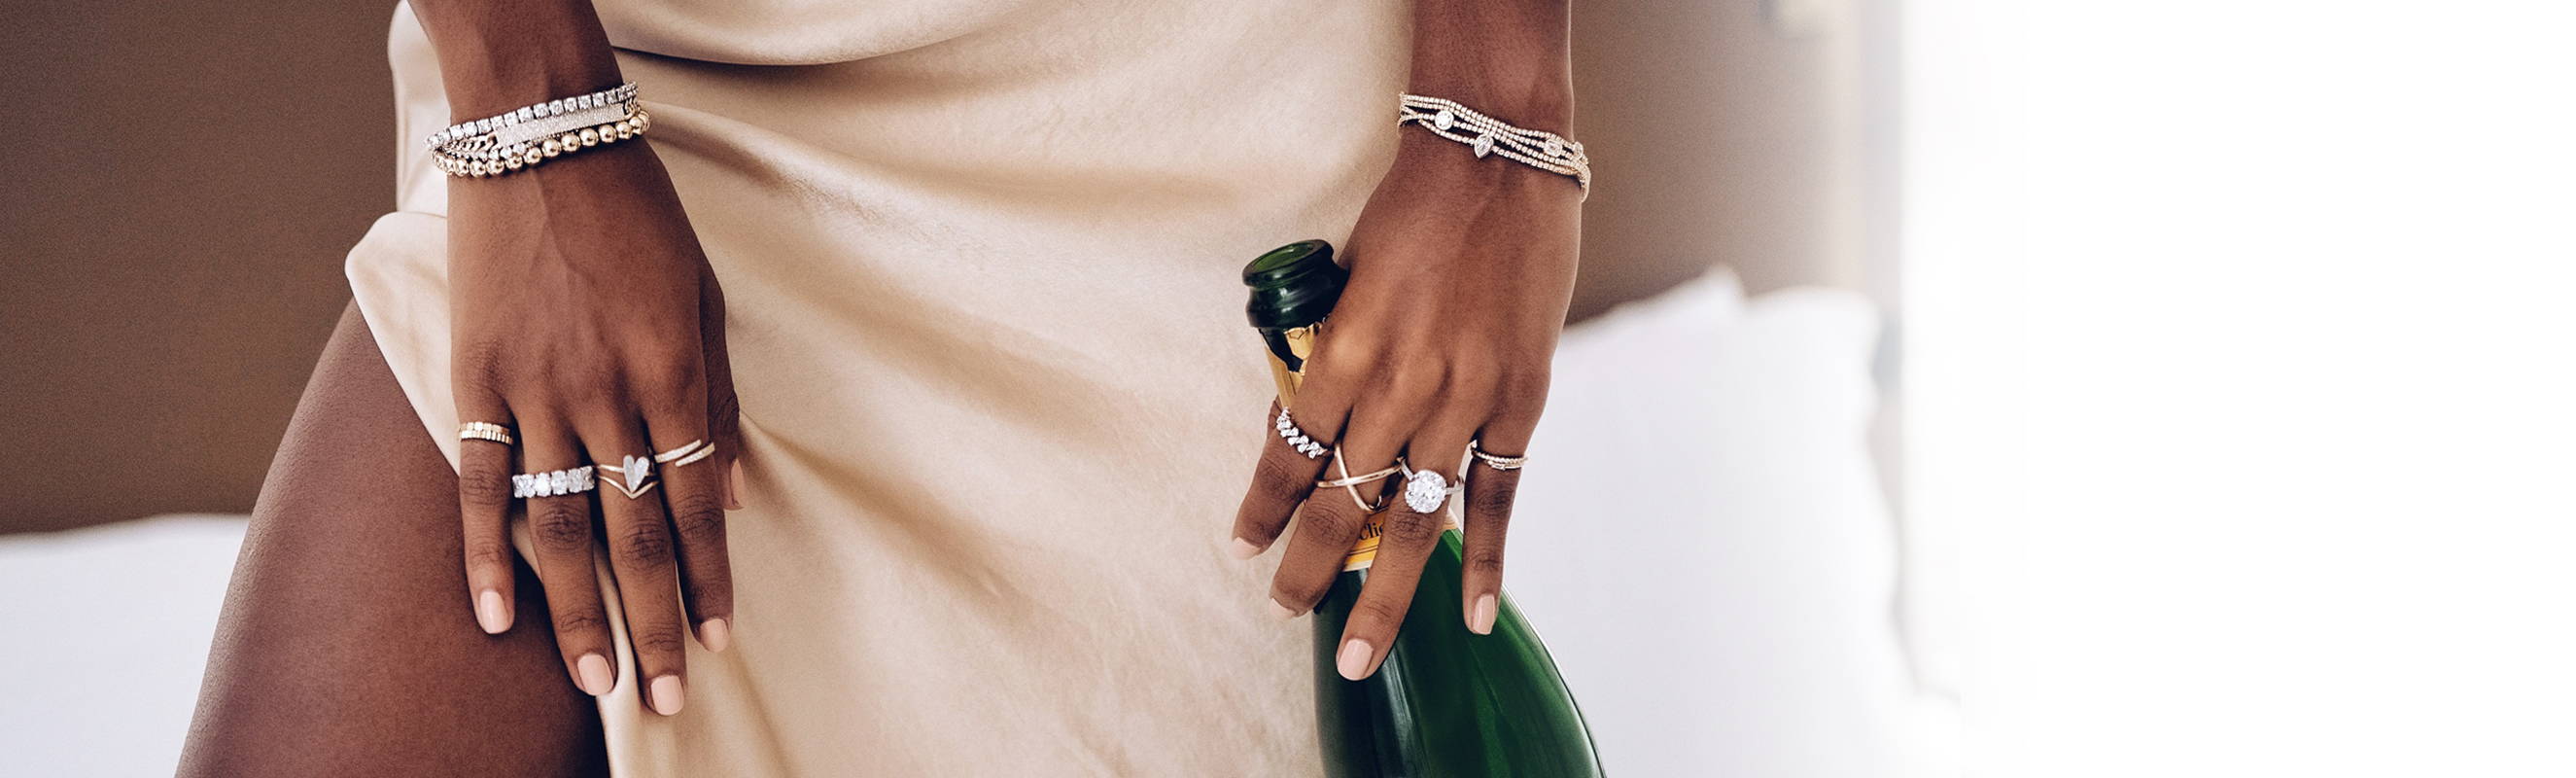 Model wearing Ring Concierge rings holding a bottle of champagne